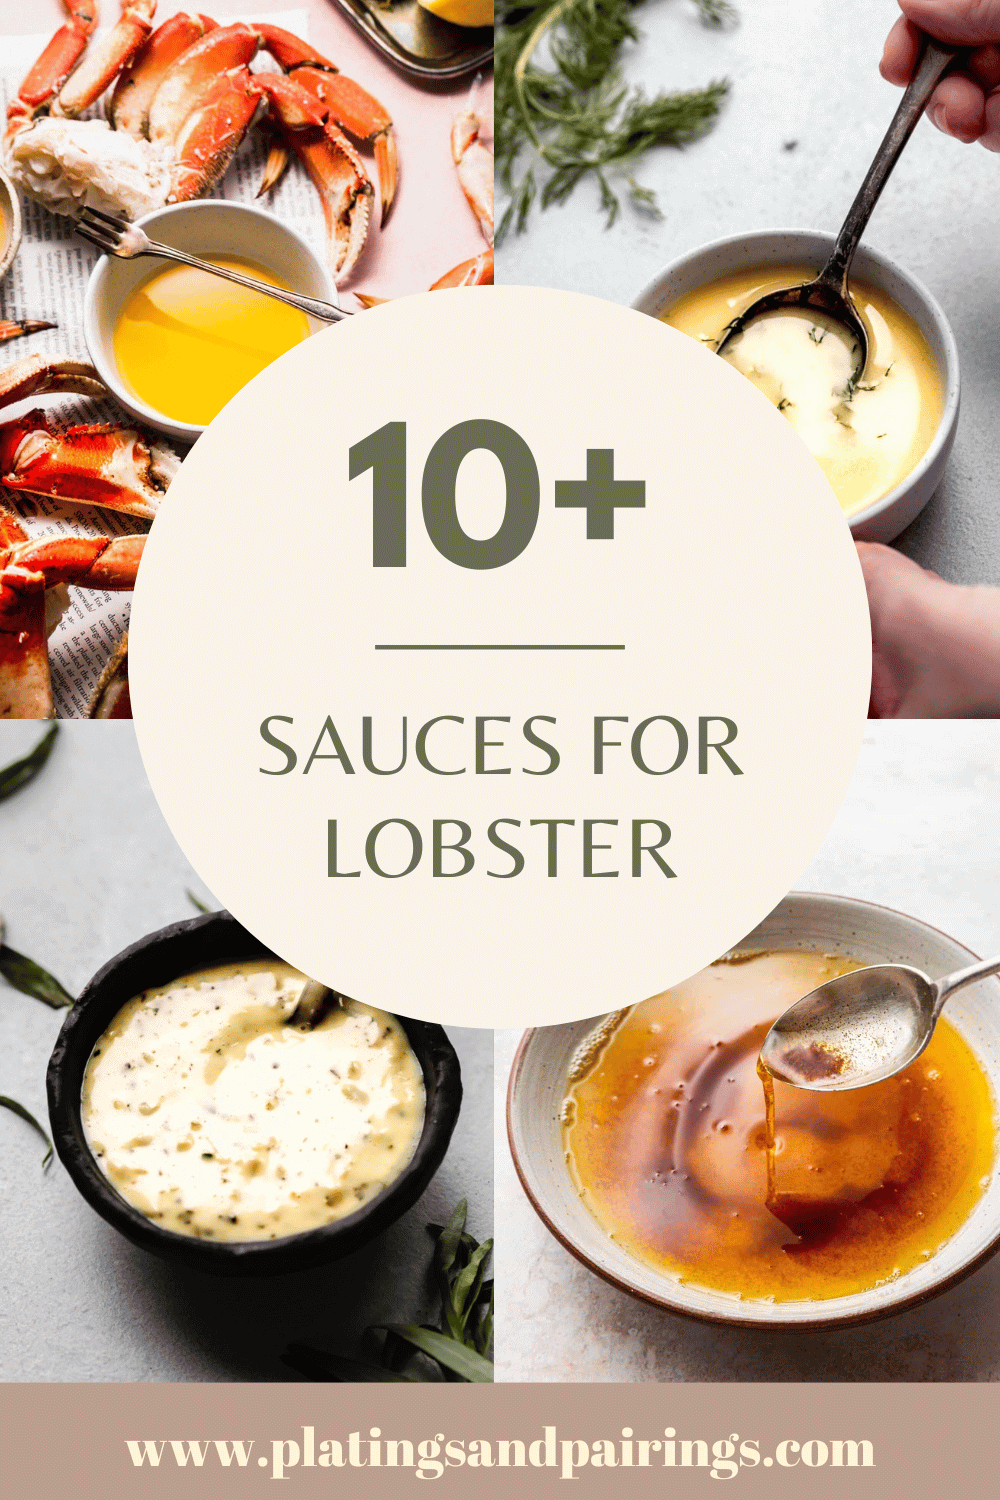 Collage of sauces for lobster with text overlay.